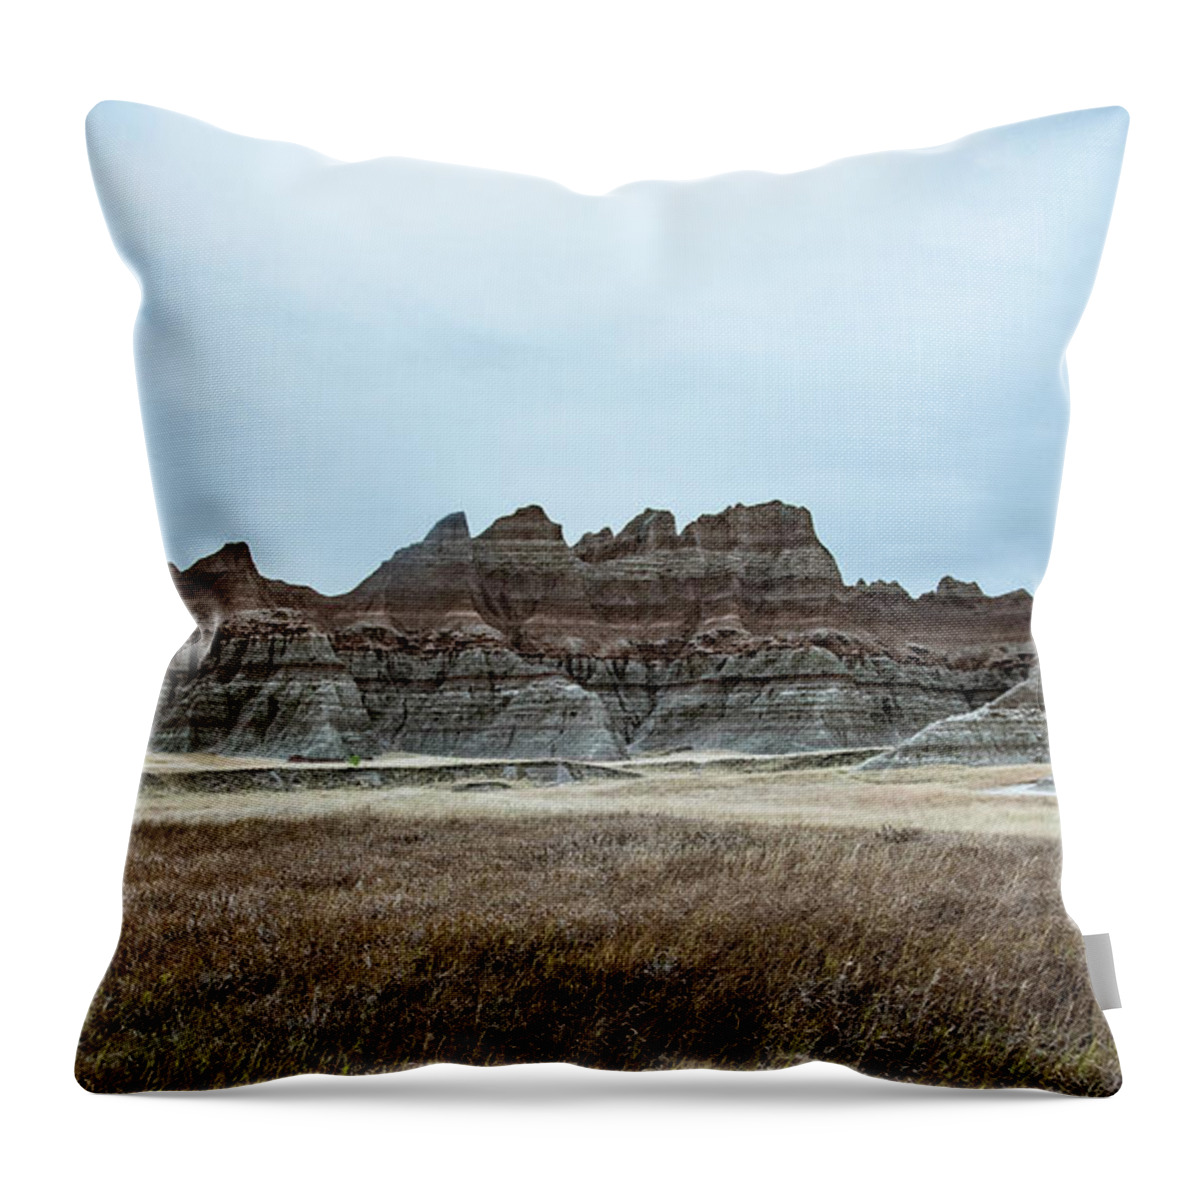  Throw Pillow featuring the photograph Badlands 10 by Wendy Carrington